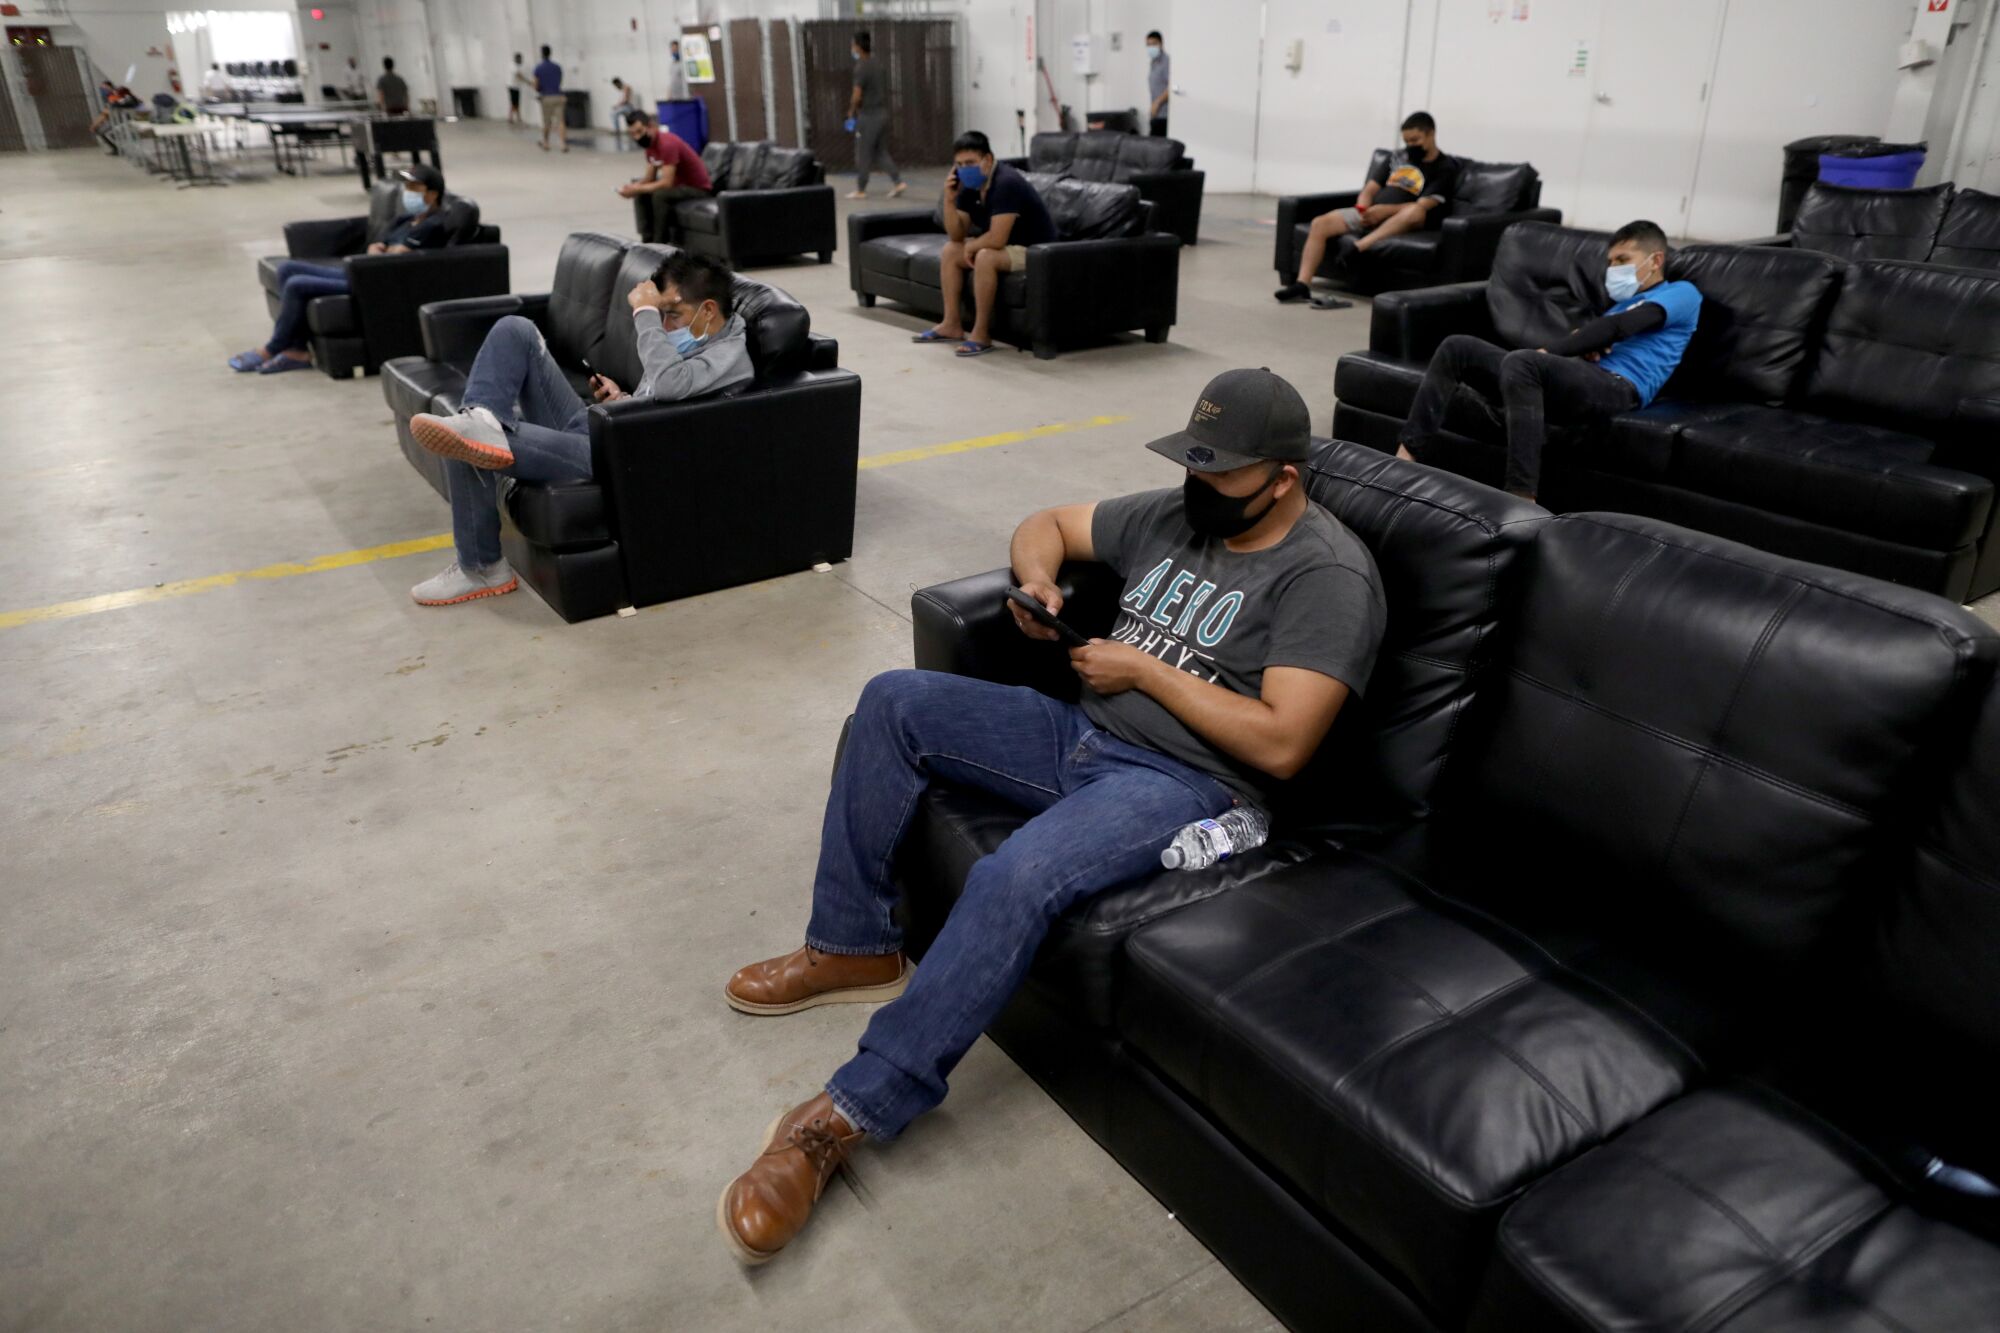 After finishing work, farmworkers relax in the living space practicing social distancing